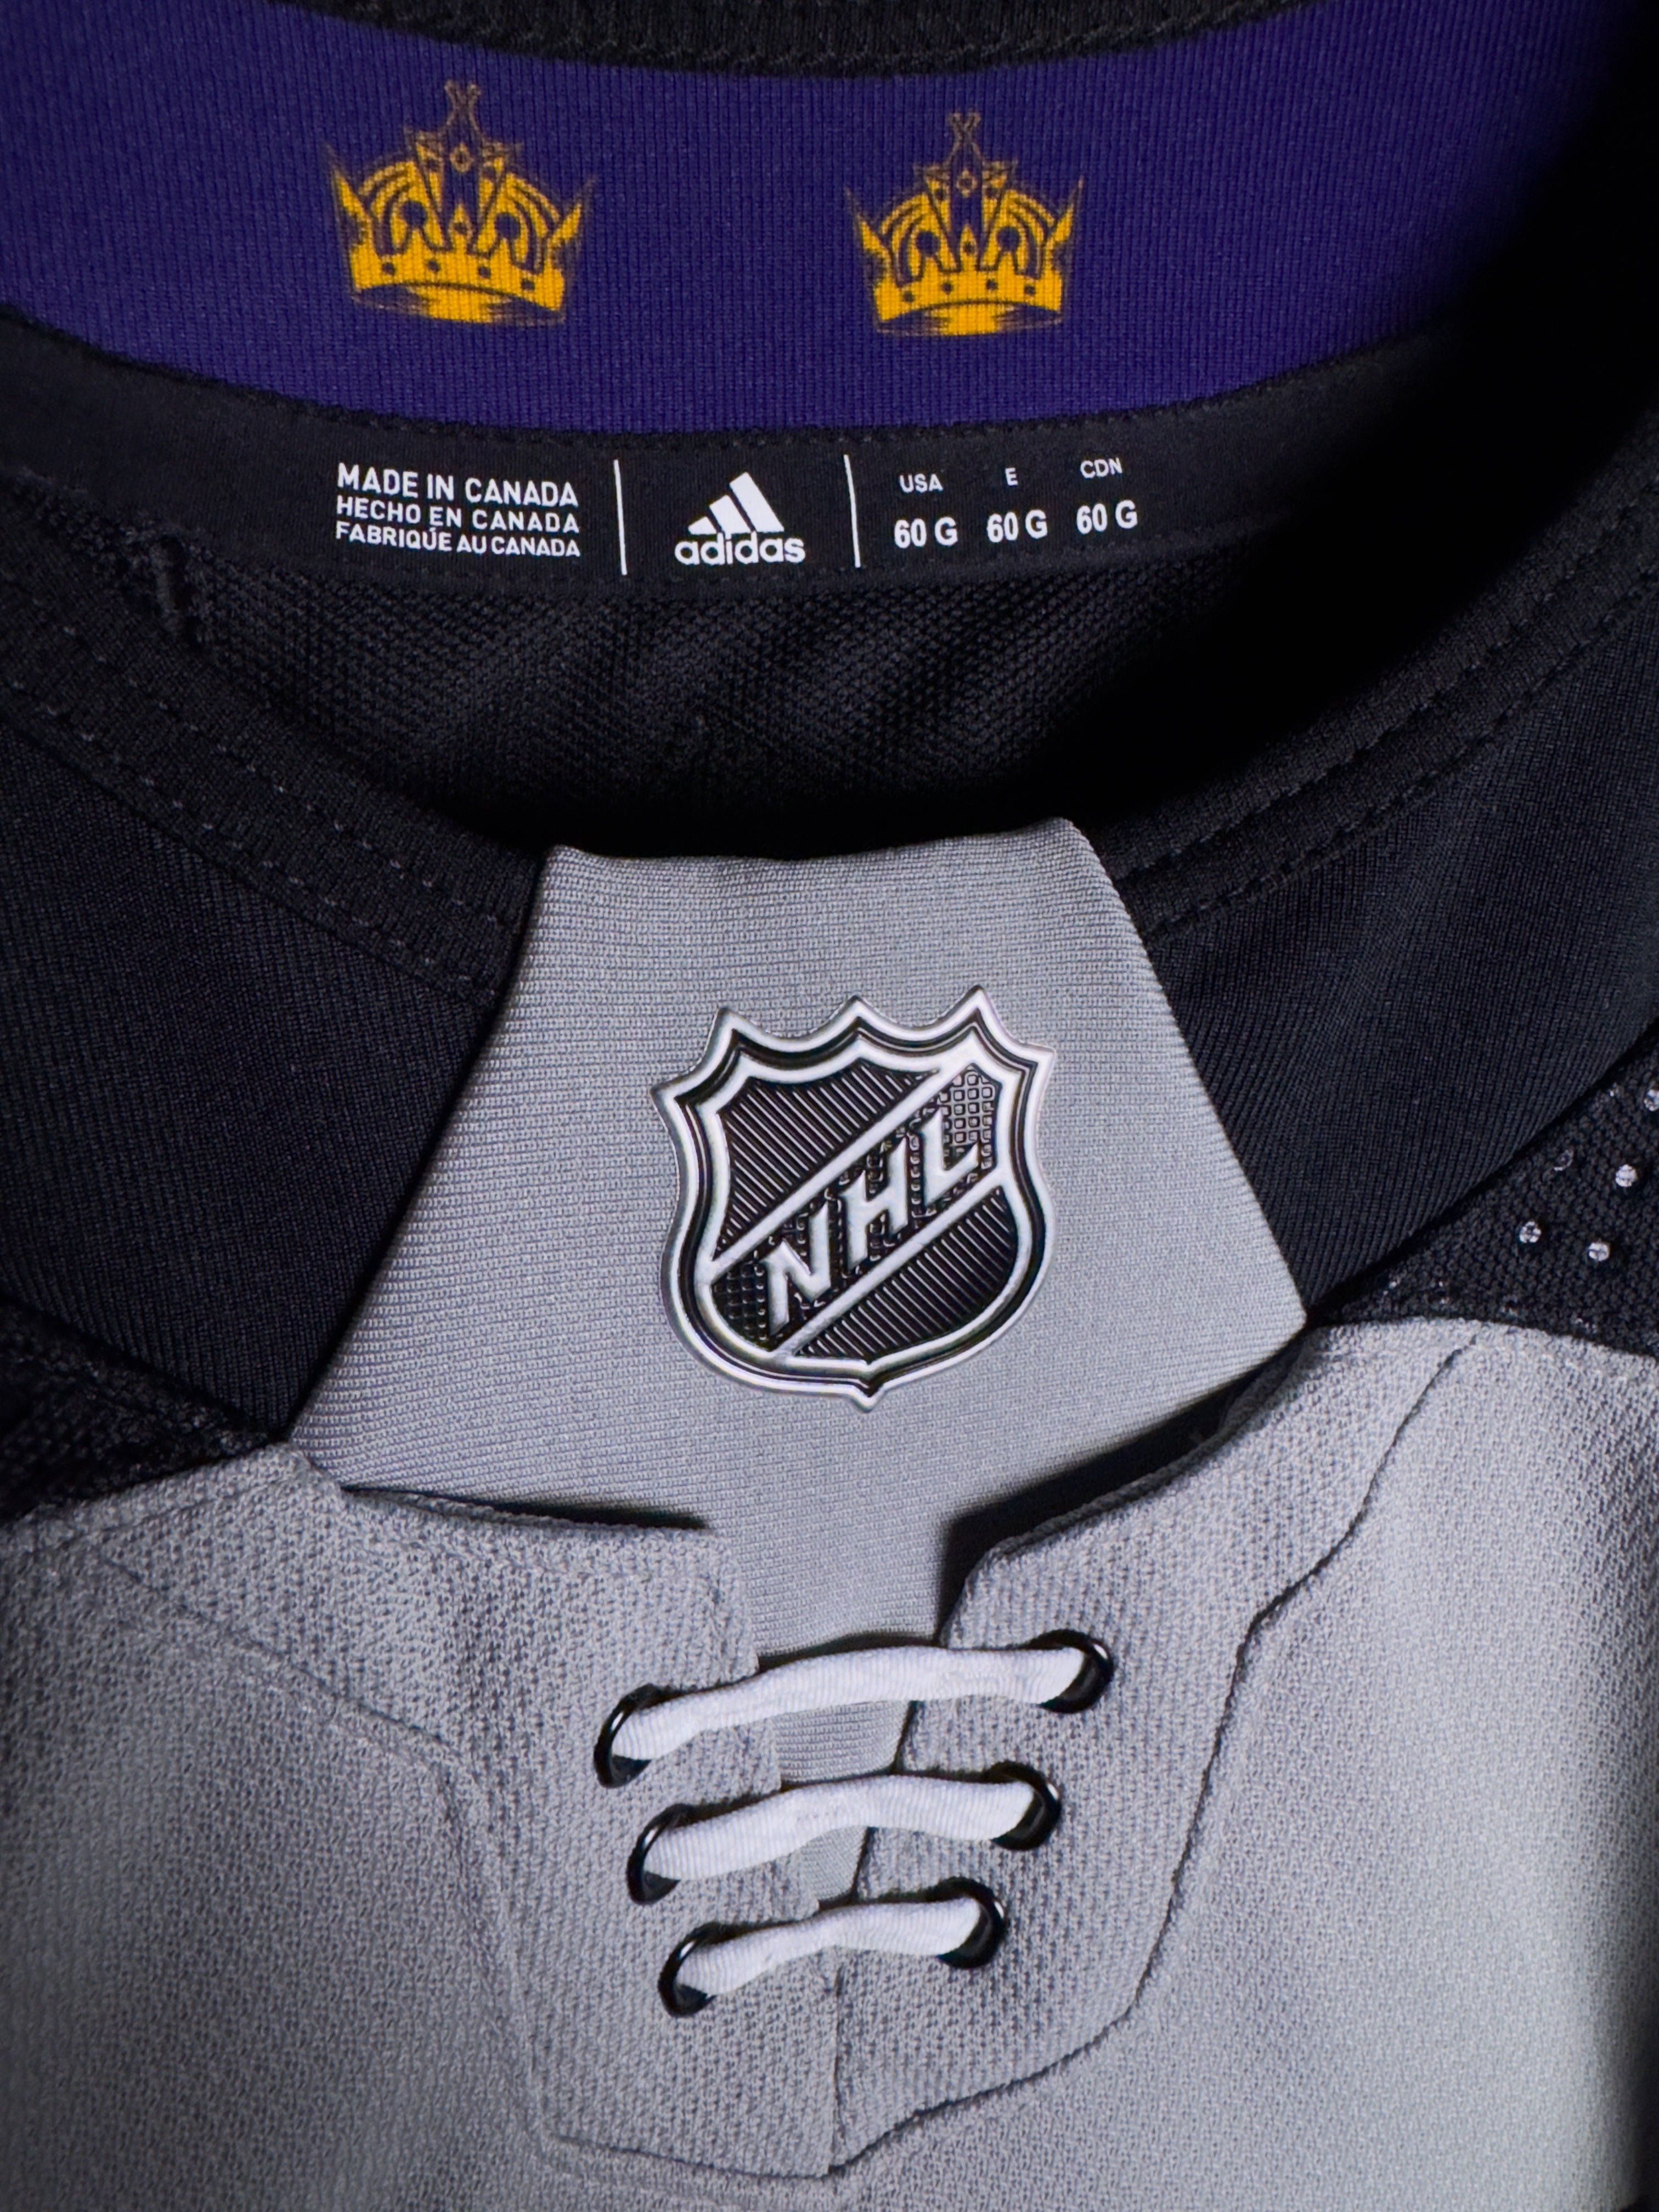 Los Angeles Kings NHL Adidas MiC Team Issued Gray Alternate Jersey Size 60G (Goalie Cut)